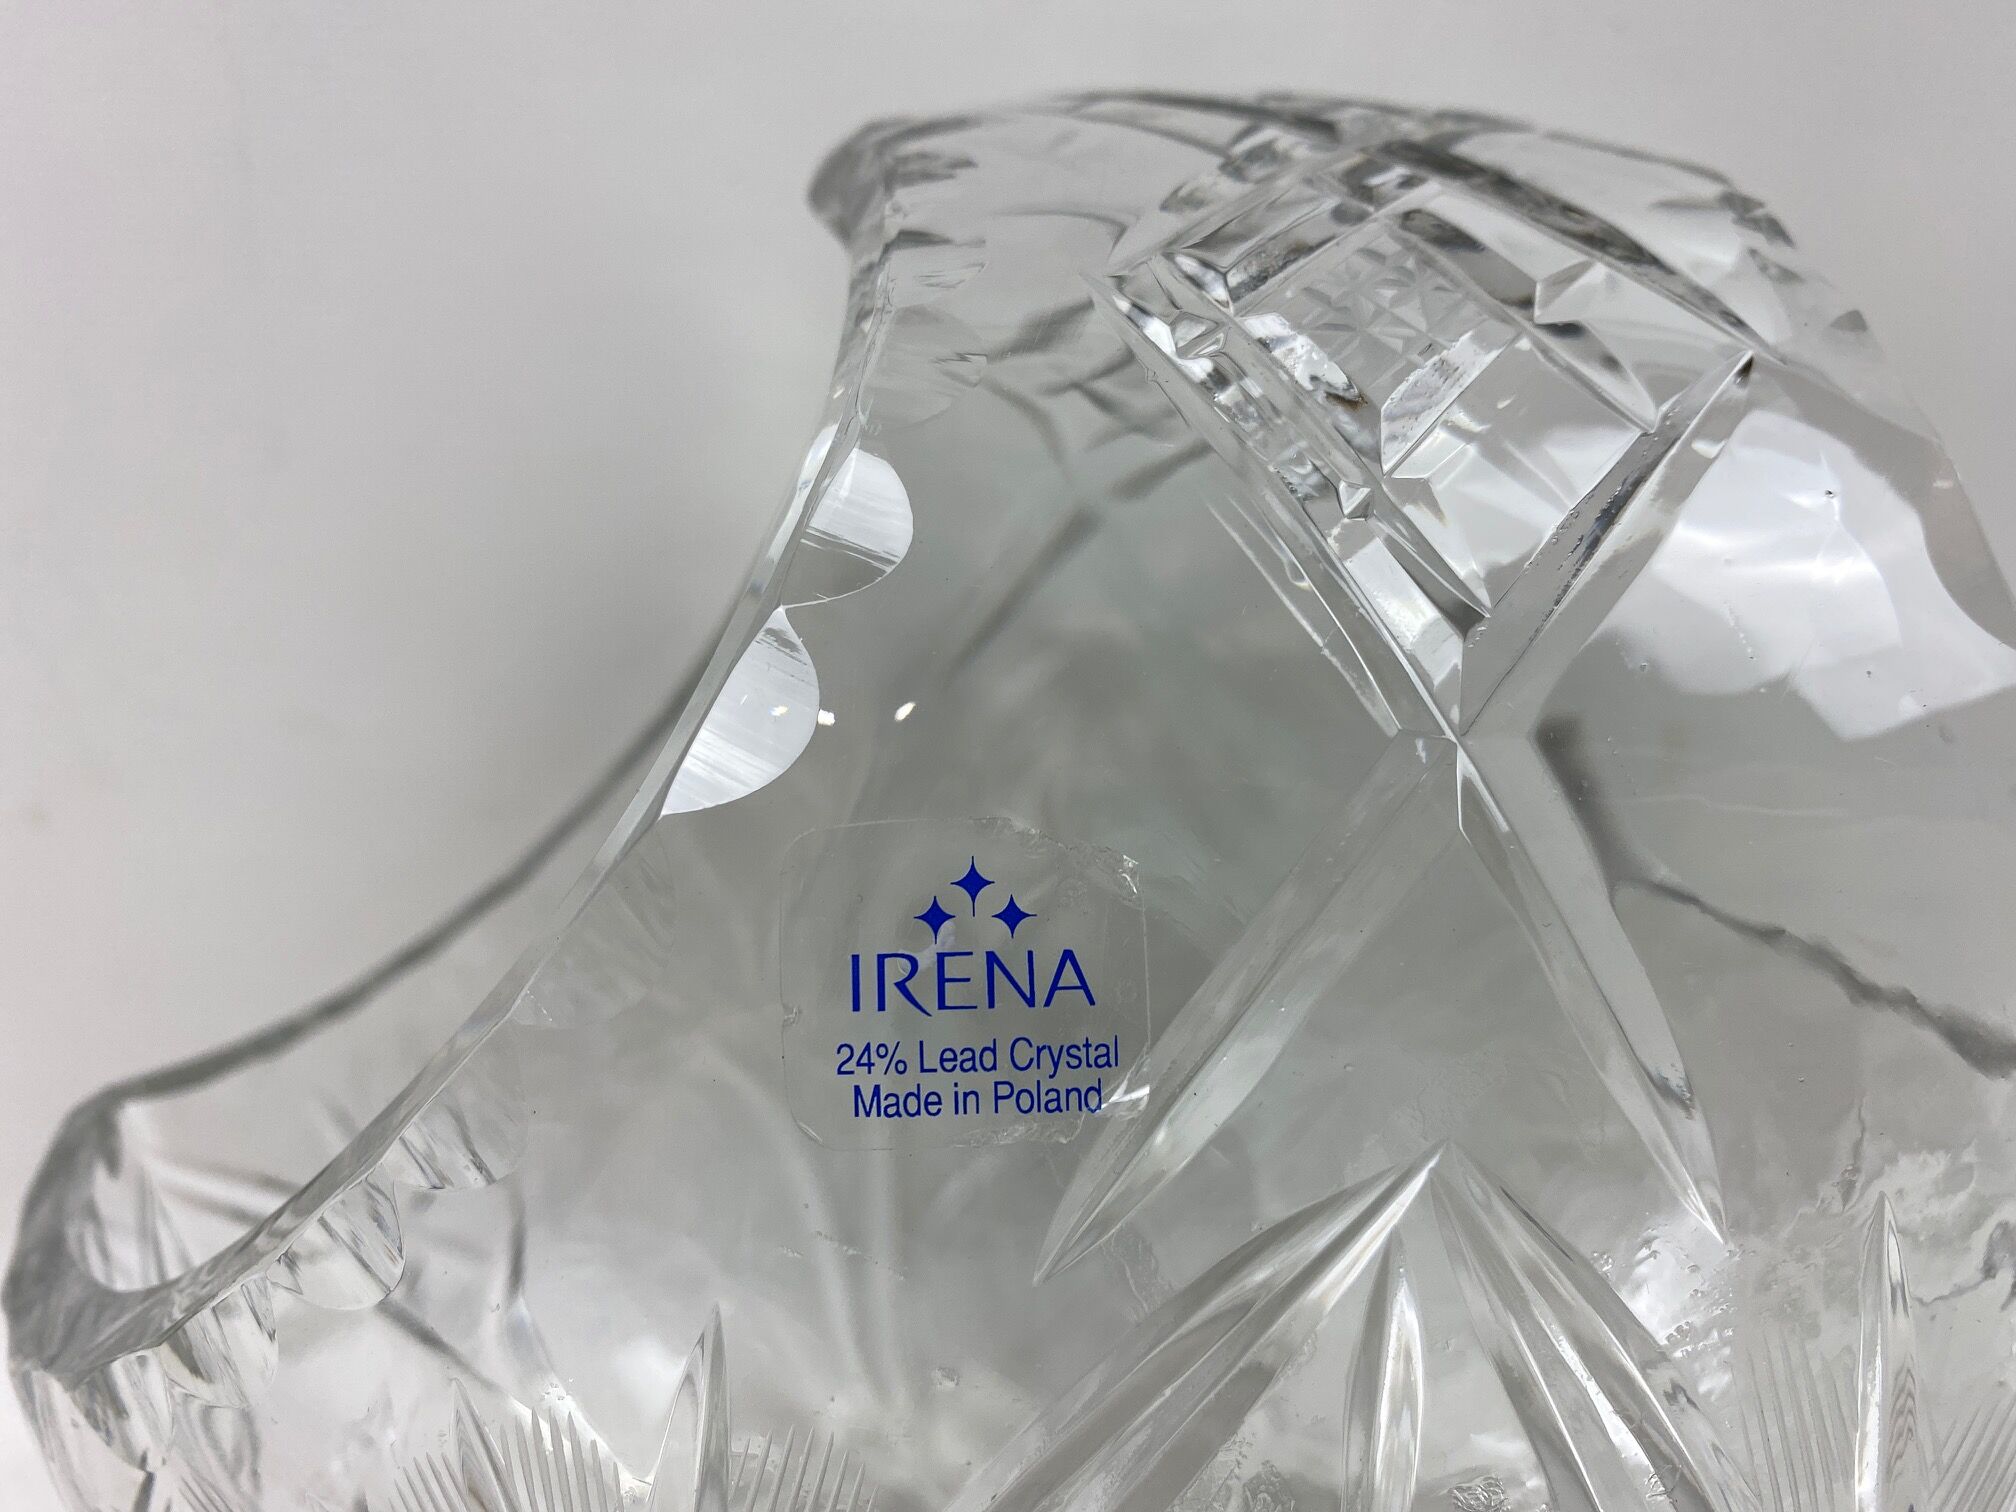 Irena made in Poland crystal basket